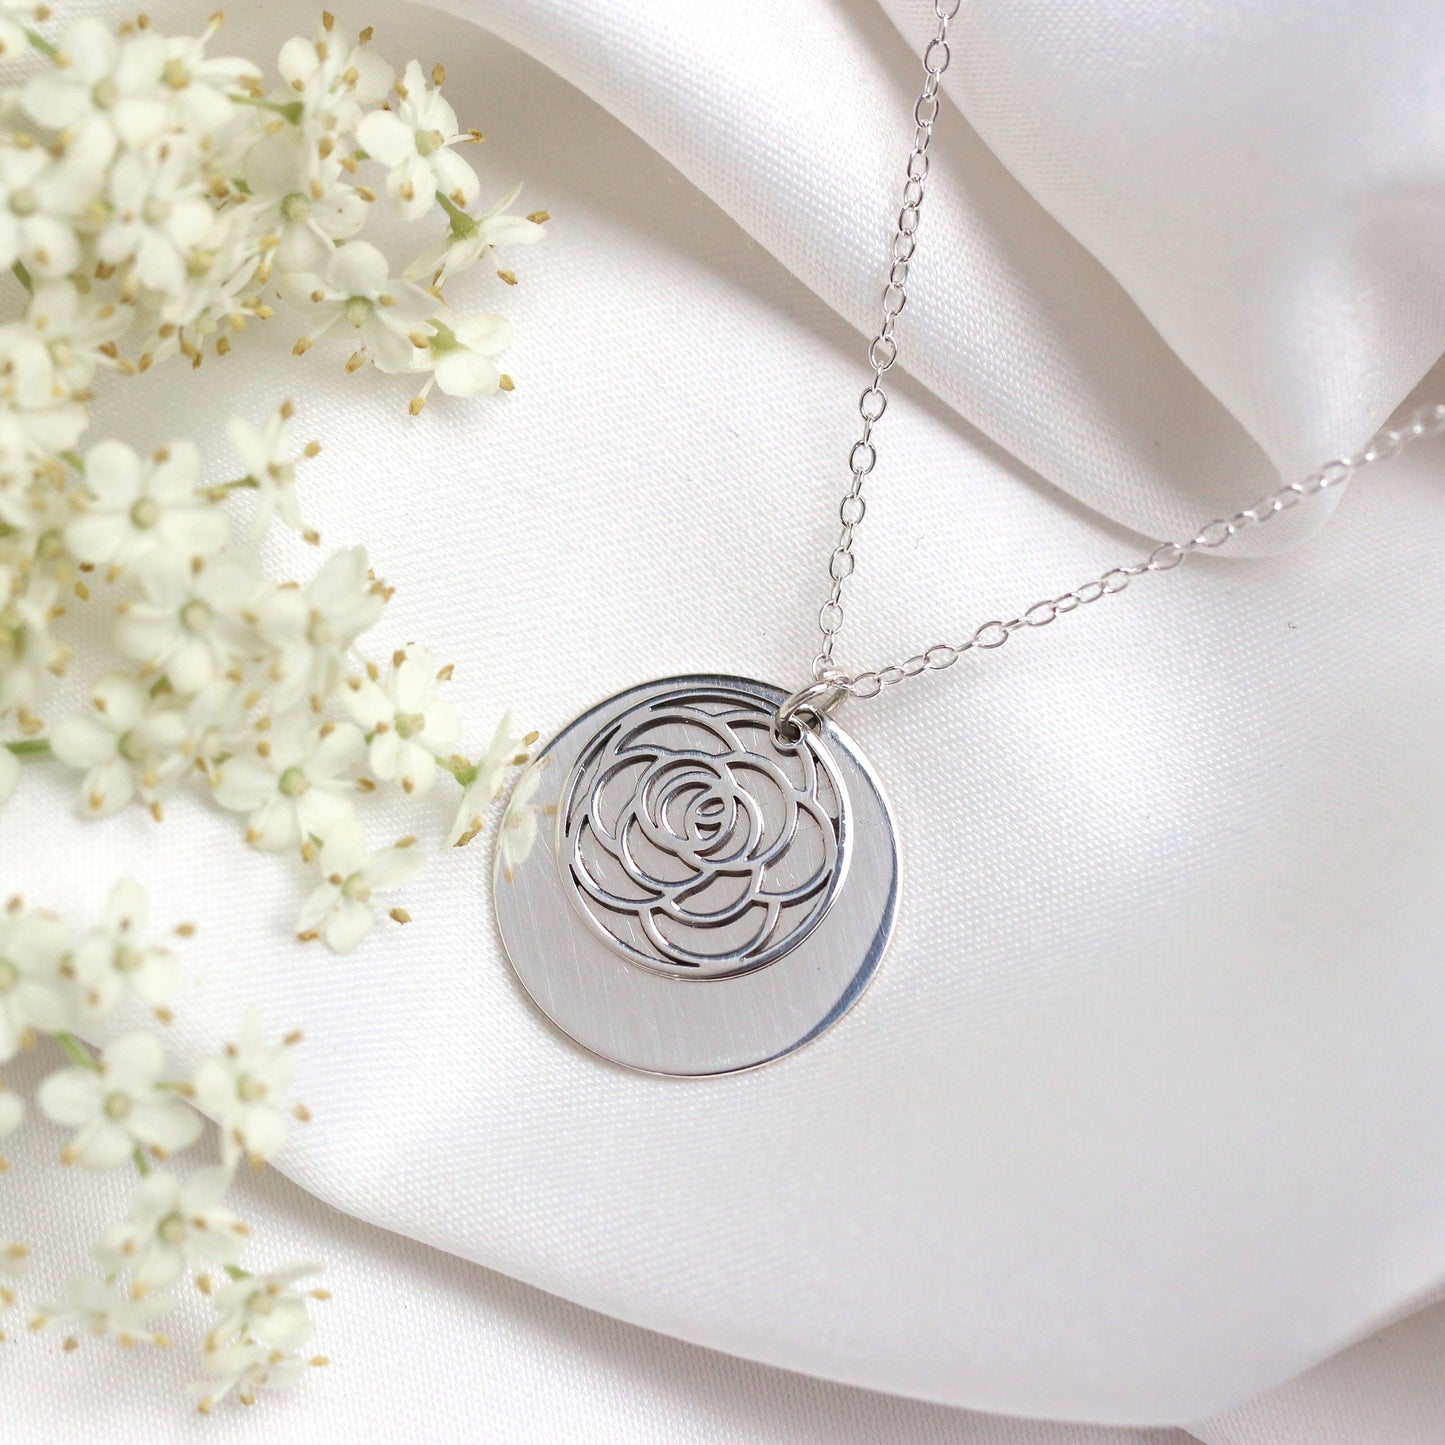 Sterling Silver June Rose Birth Flower & 18mm Engravable Tag Necklace 14 - 22 Inches